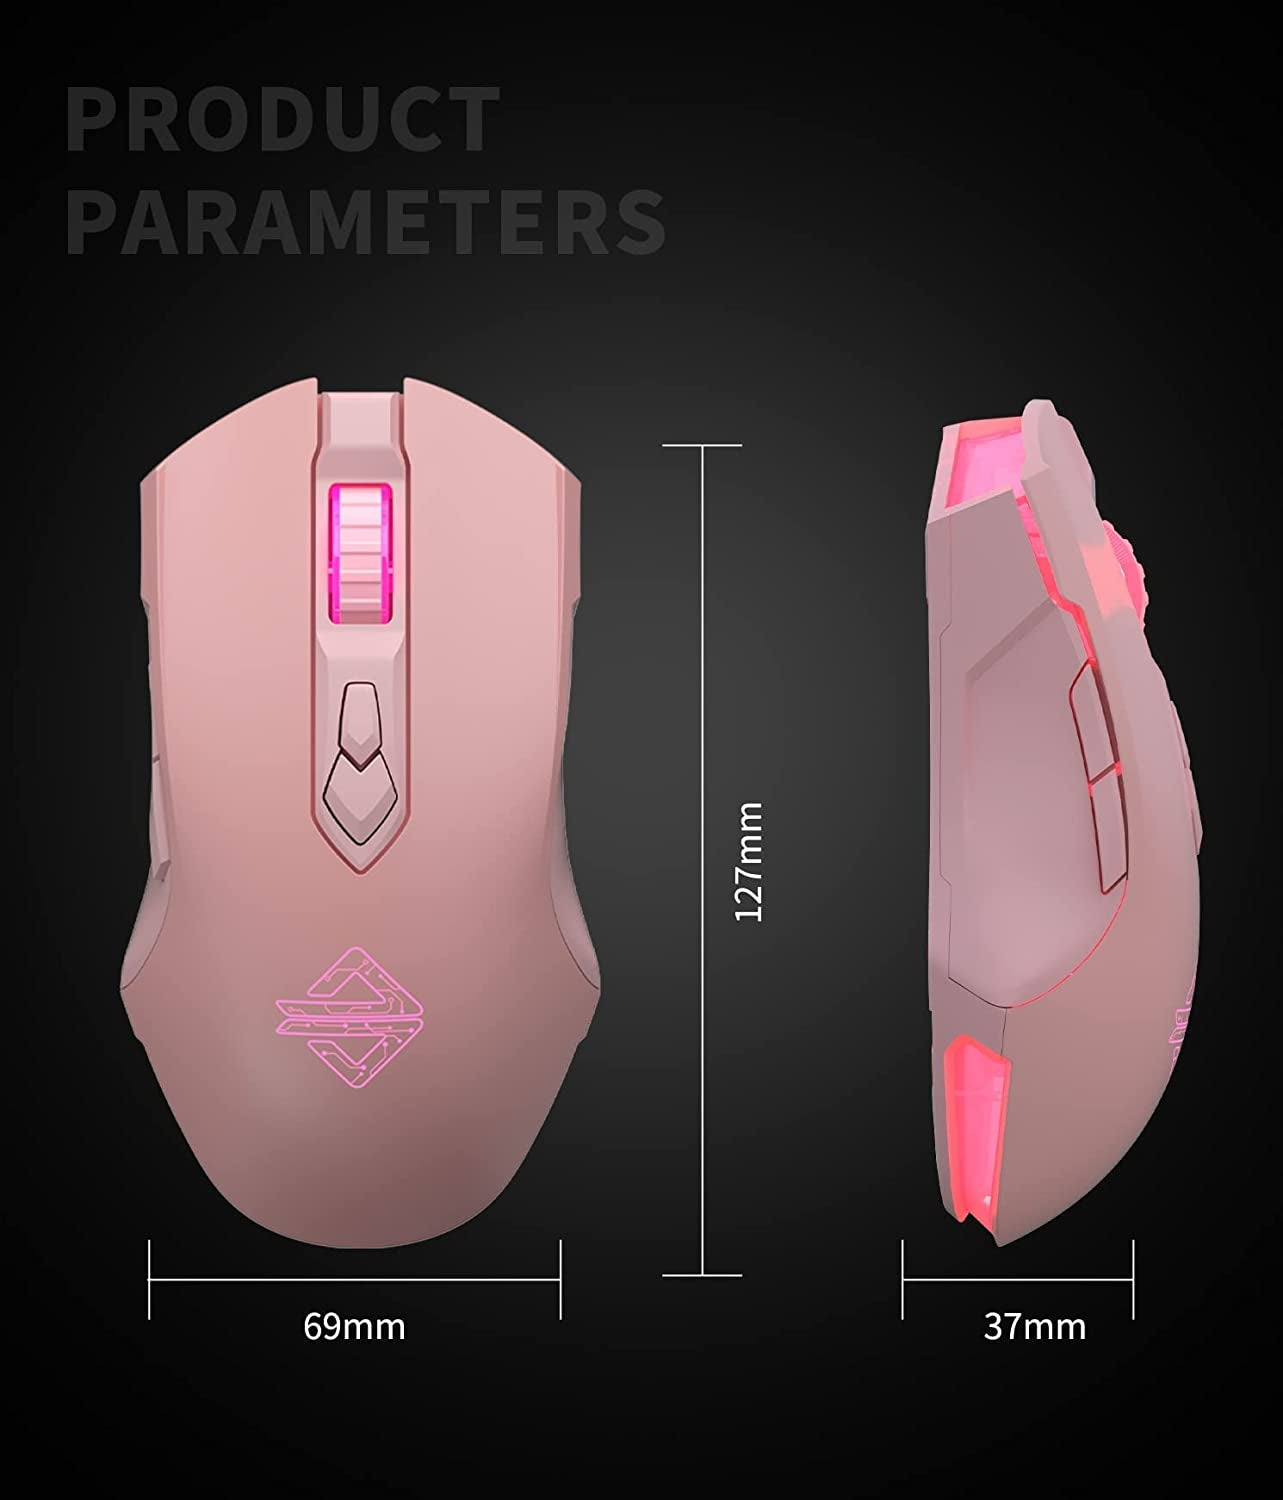 AJ52 Watcher RGB Gaming Mouse, Programmable 7 Buttons, Ergonomic LED Backlit USB Gamer Mice Computer Laptop PC, for Windows Mac OS Linux, Pink